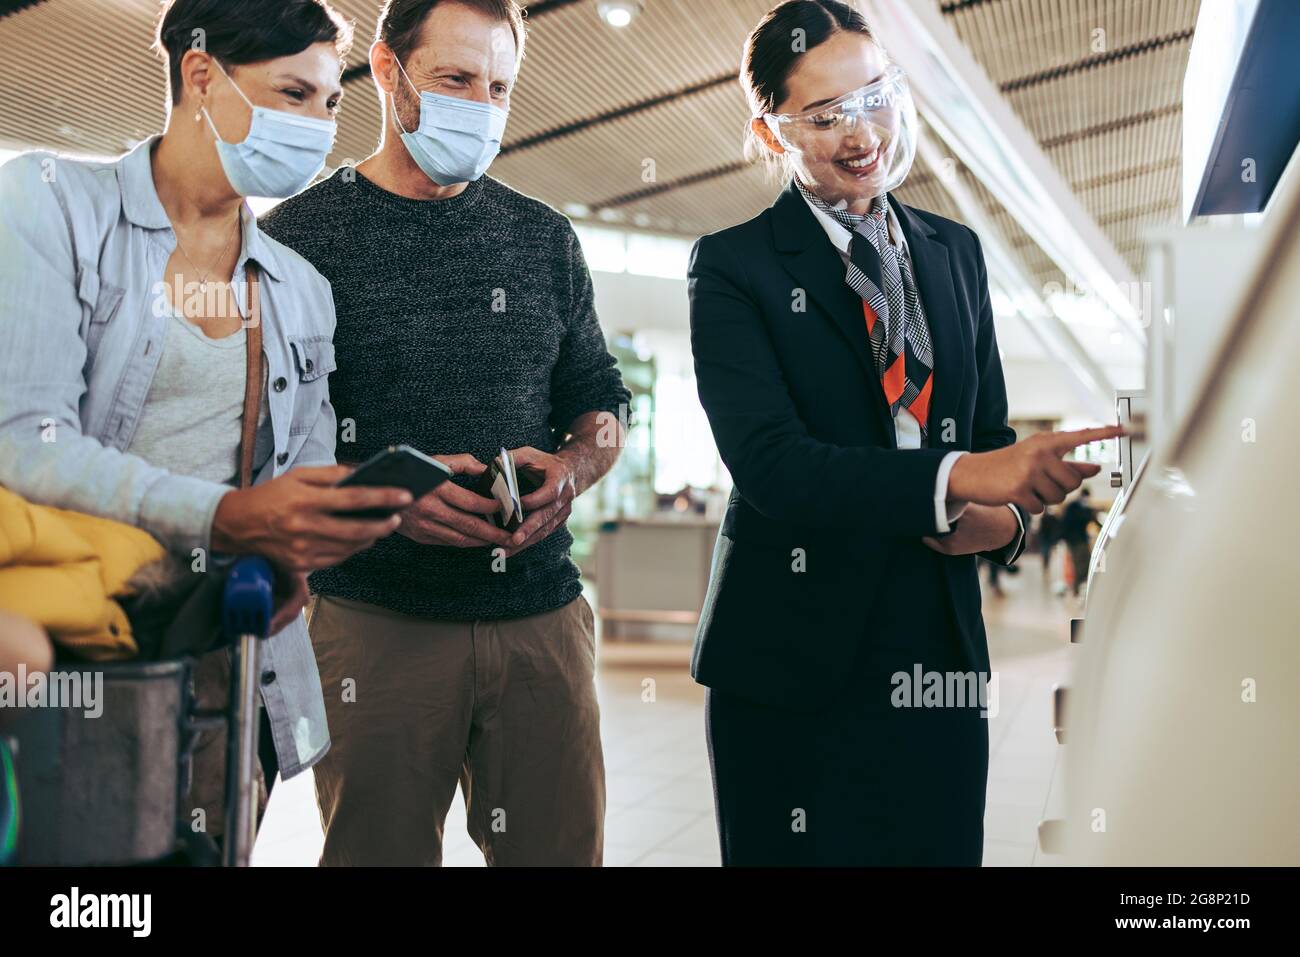 Ground staff helping couple with self service check-in during pandemic. Man and woman in face masks helped by airlines attendant at airport in pandemi Stock Photo